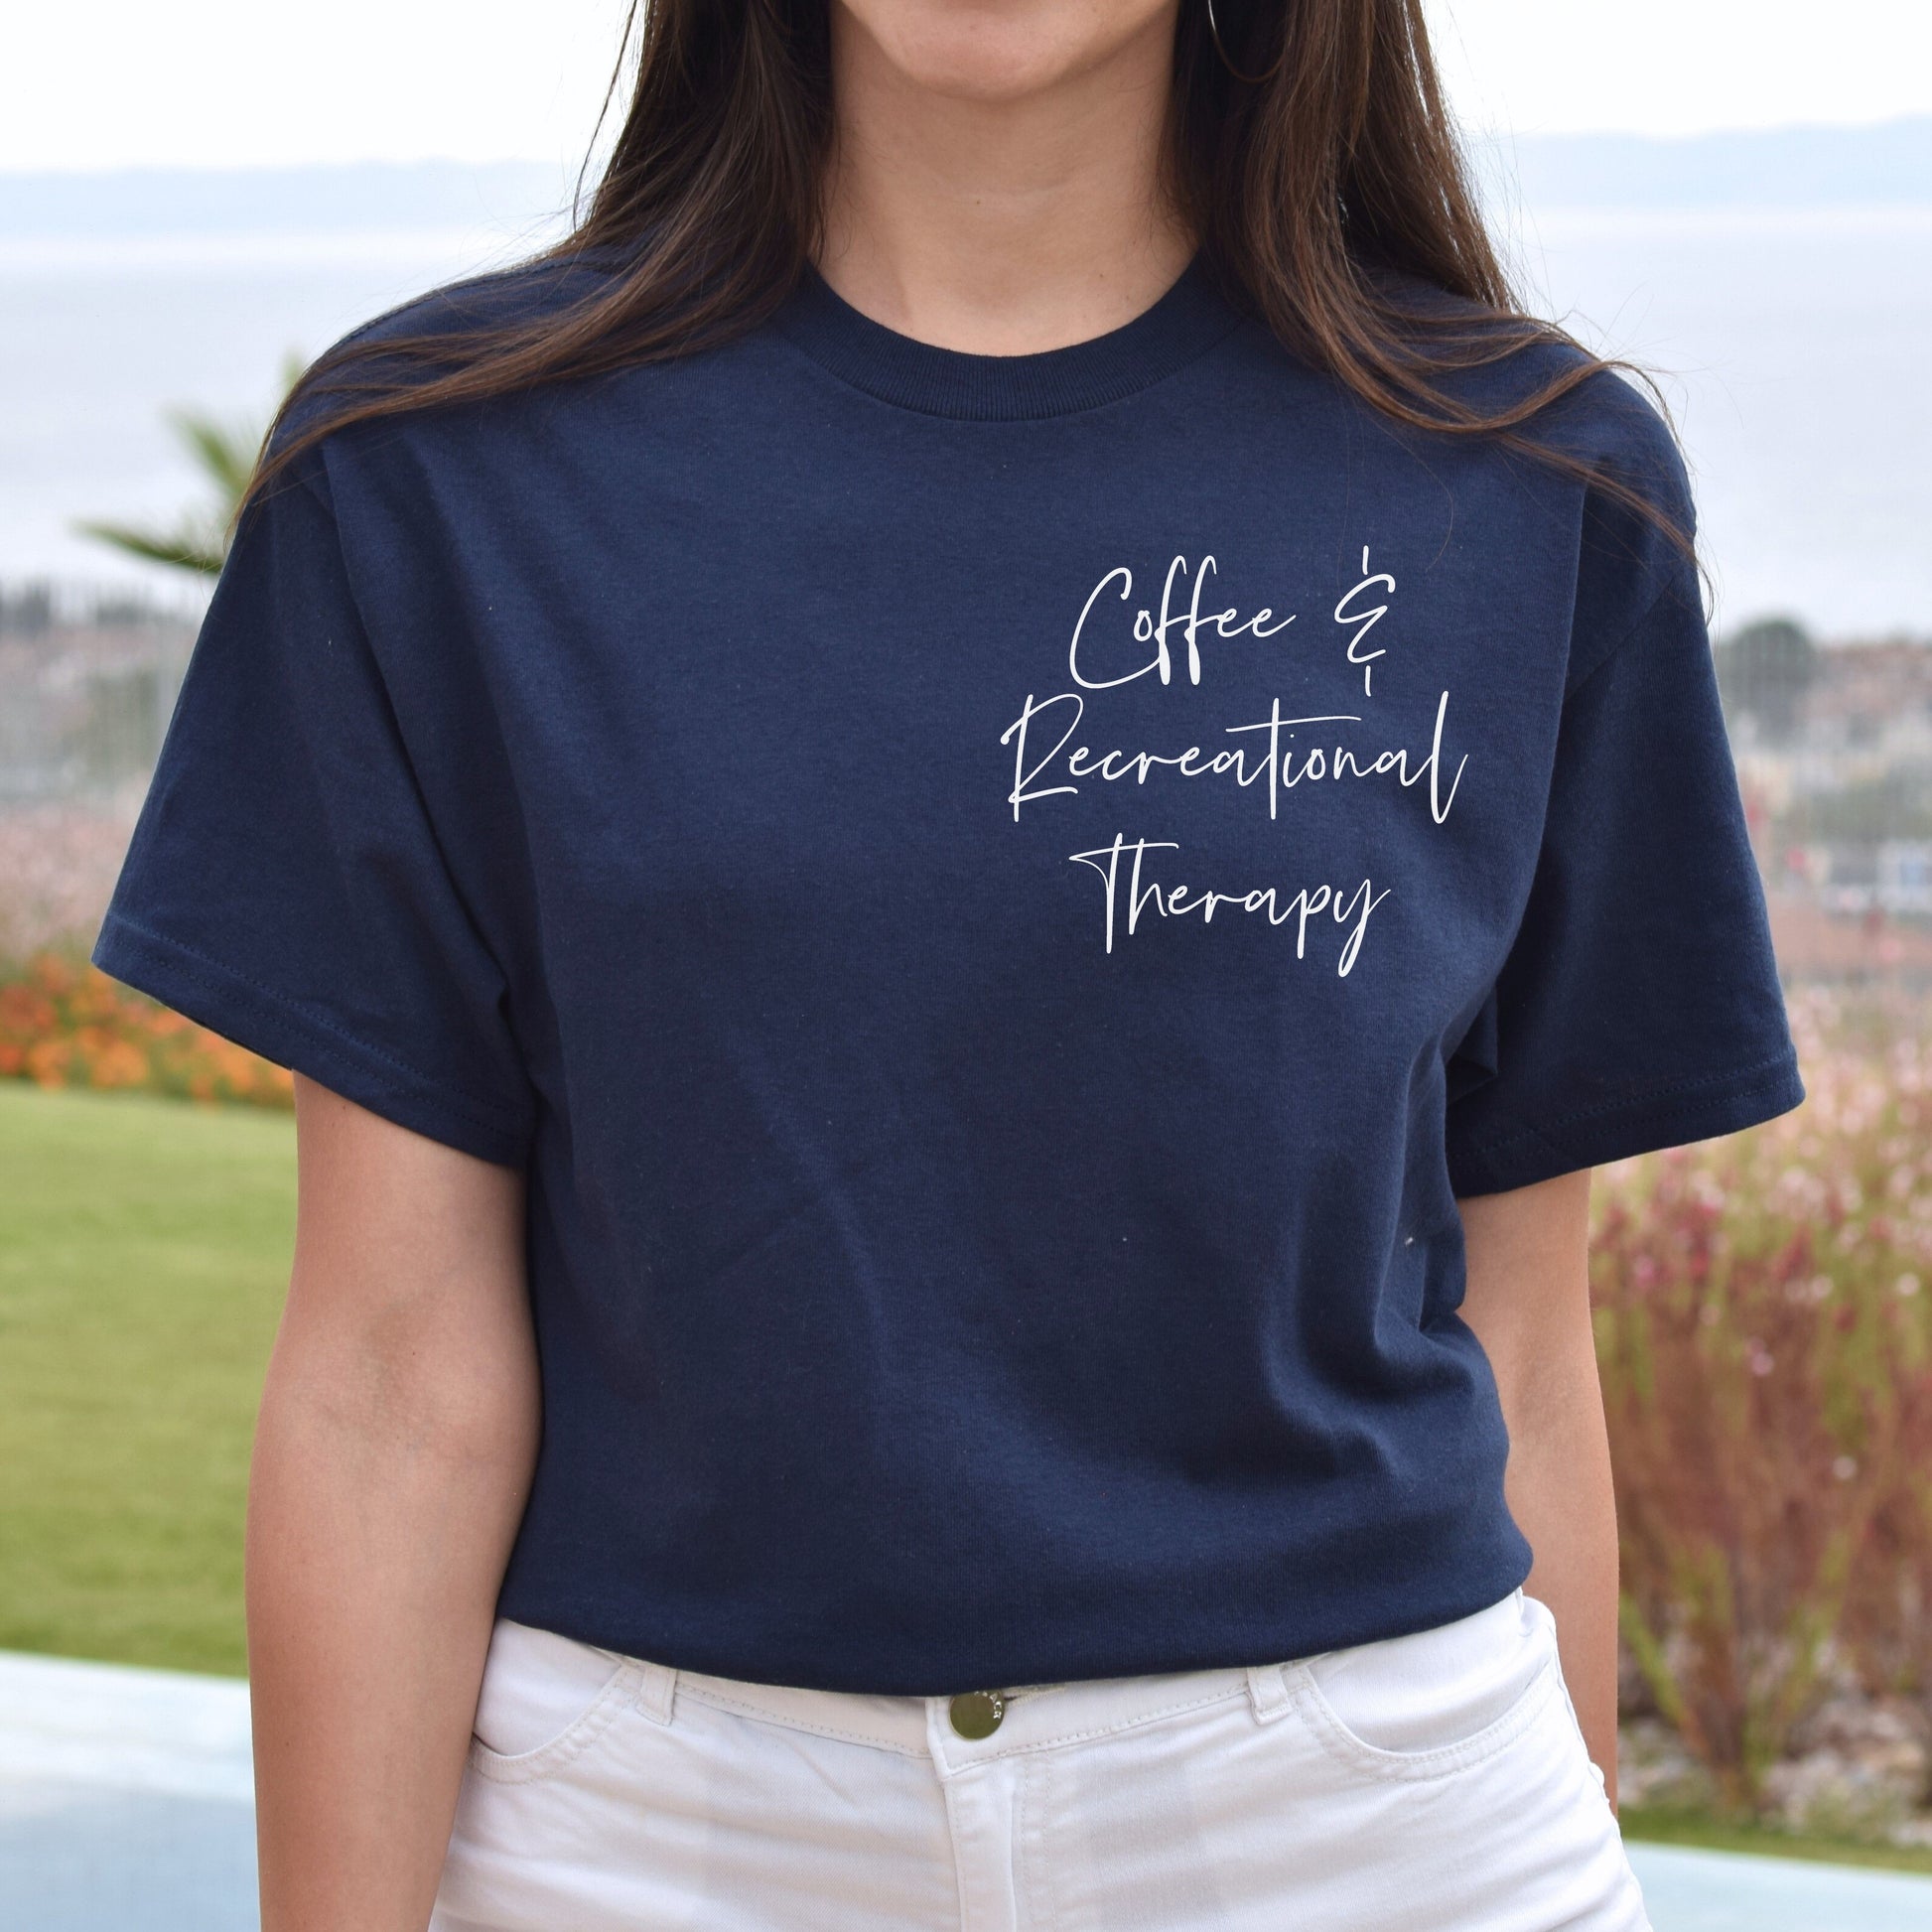 Coffee and recreational therapy pocket Unisex T-shirt RT tee Black Navy Dark Heather-Navy-Family-Gift-Planet